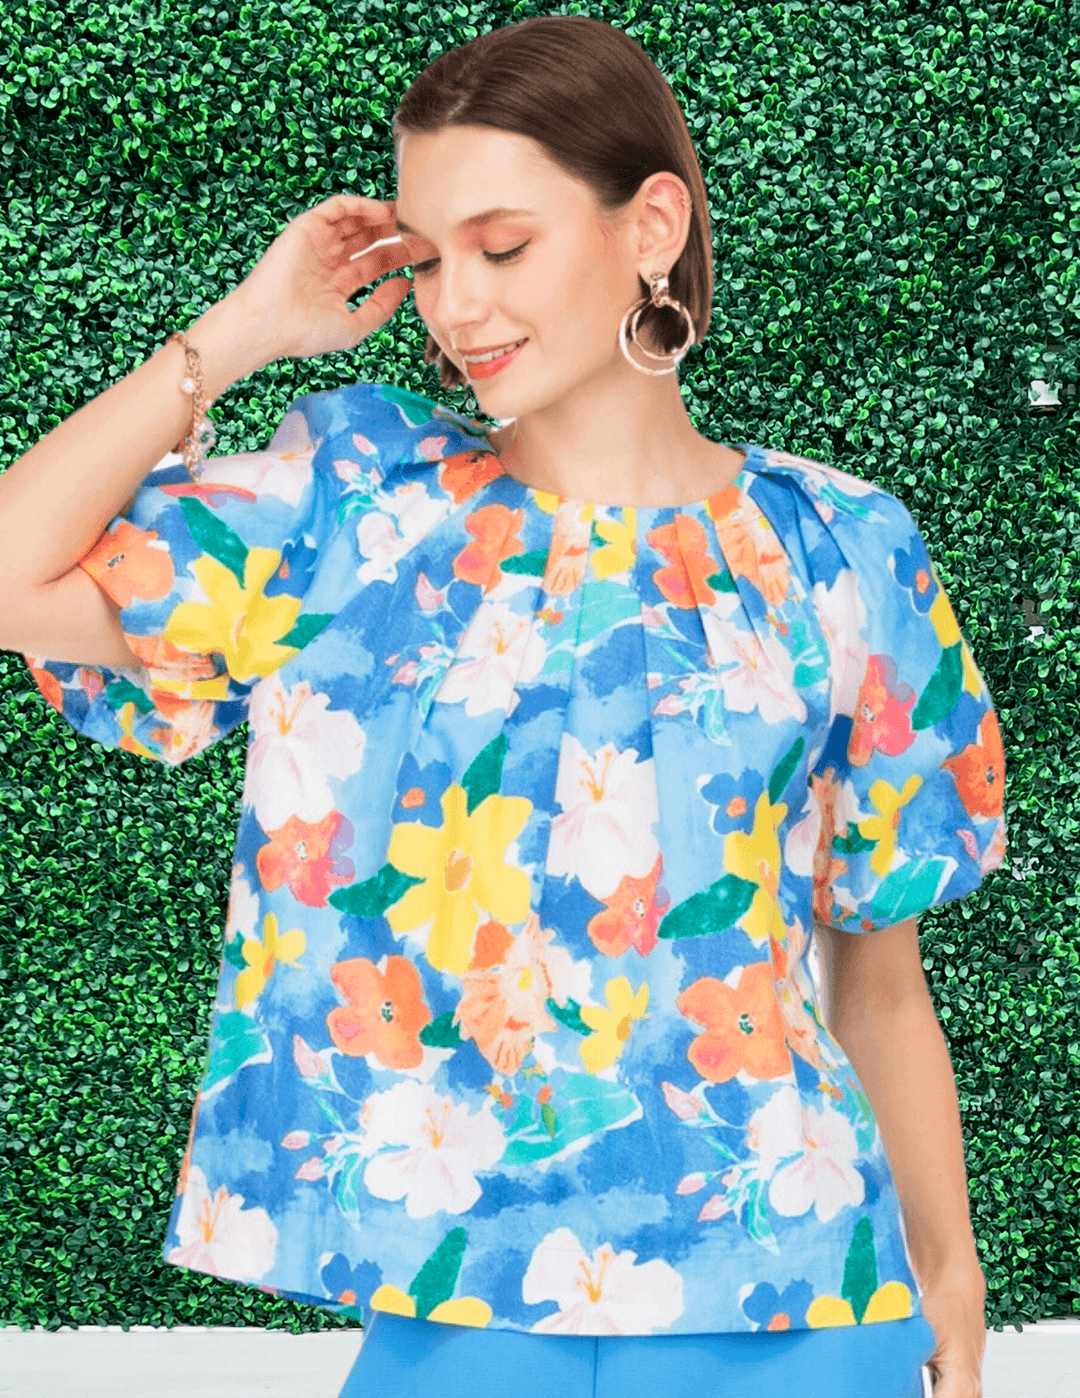 houston astros colored floral top by jade melody tam houston